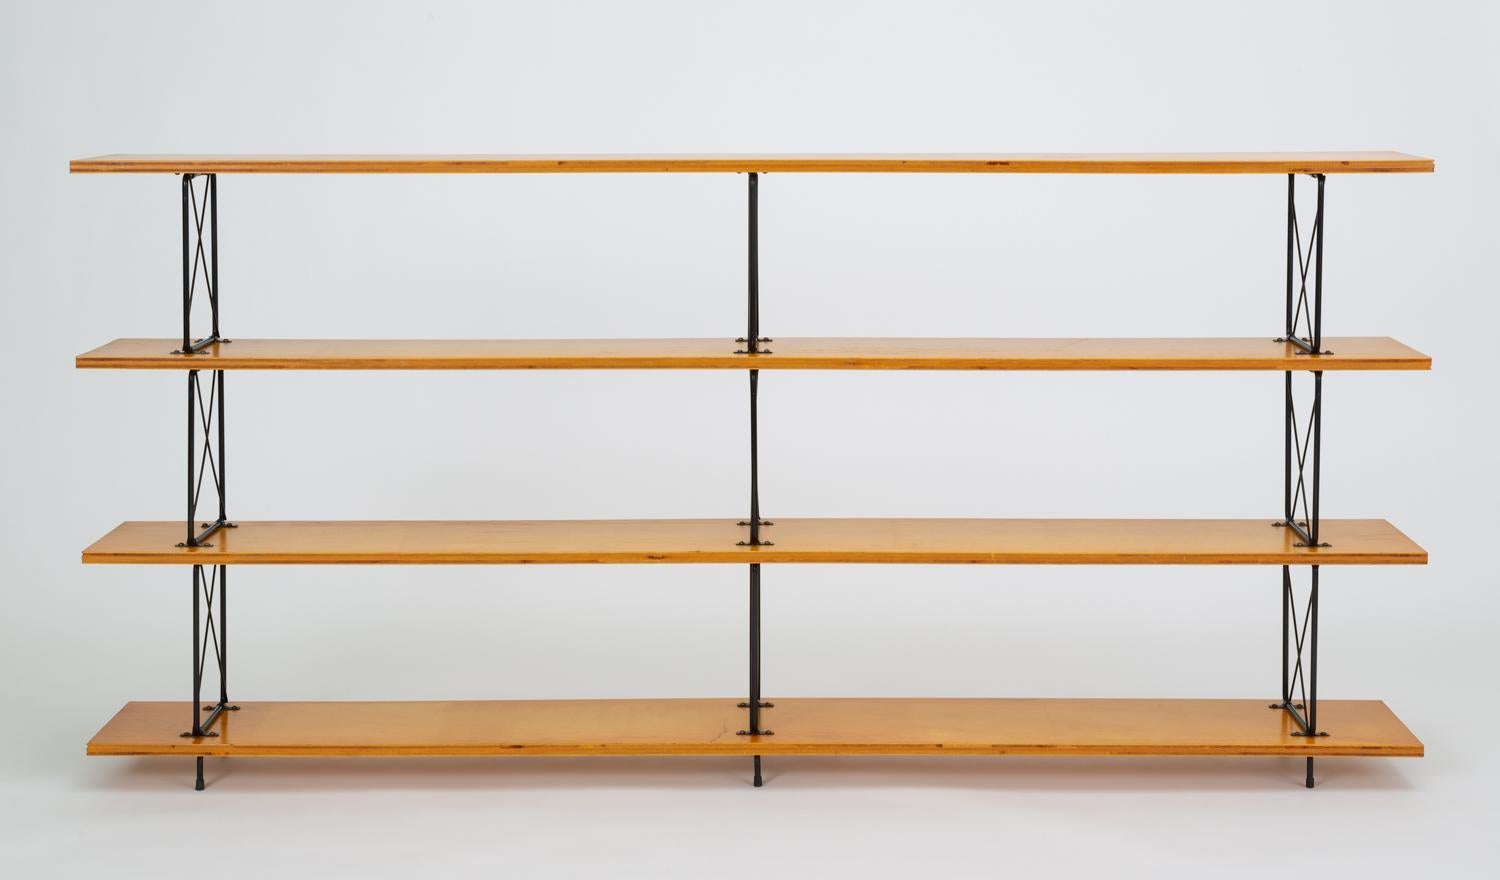 A versatile shelving or display unit with long mahogany plywood shelves and a framework in black-enameled steel. Each of the three wooden shelves is supported by three wire brackets with an X-shaped brace. The piece sits atop six small feet, capped